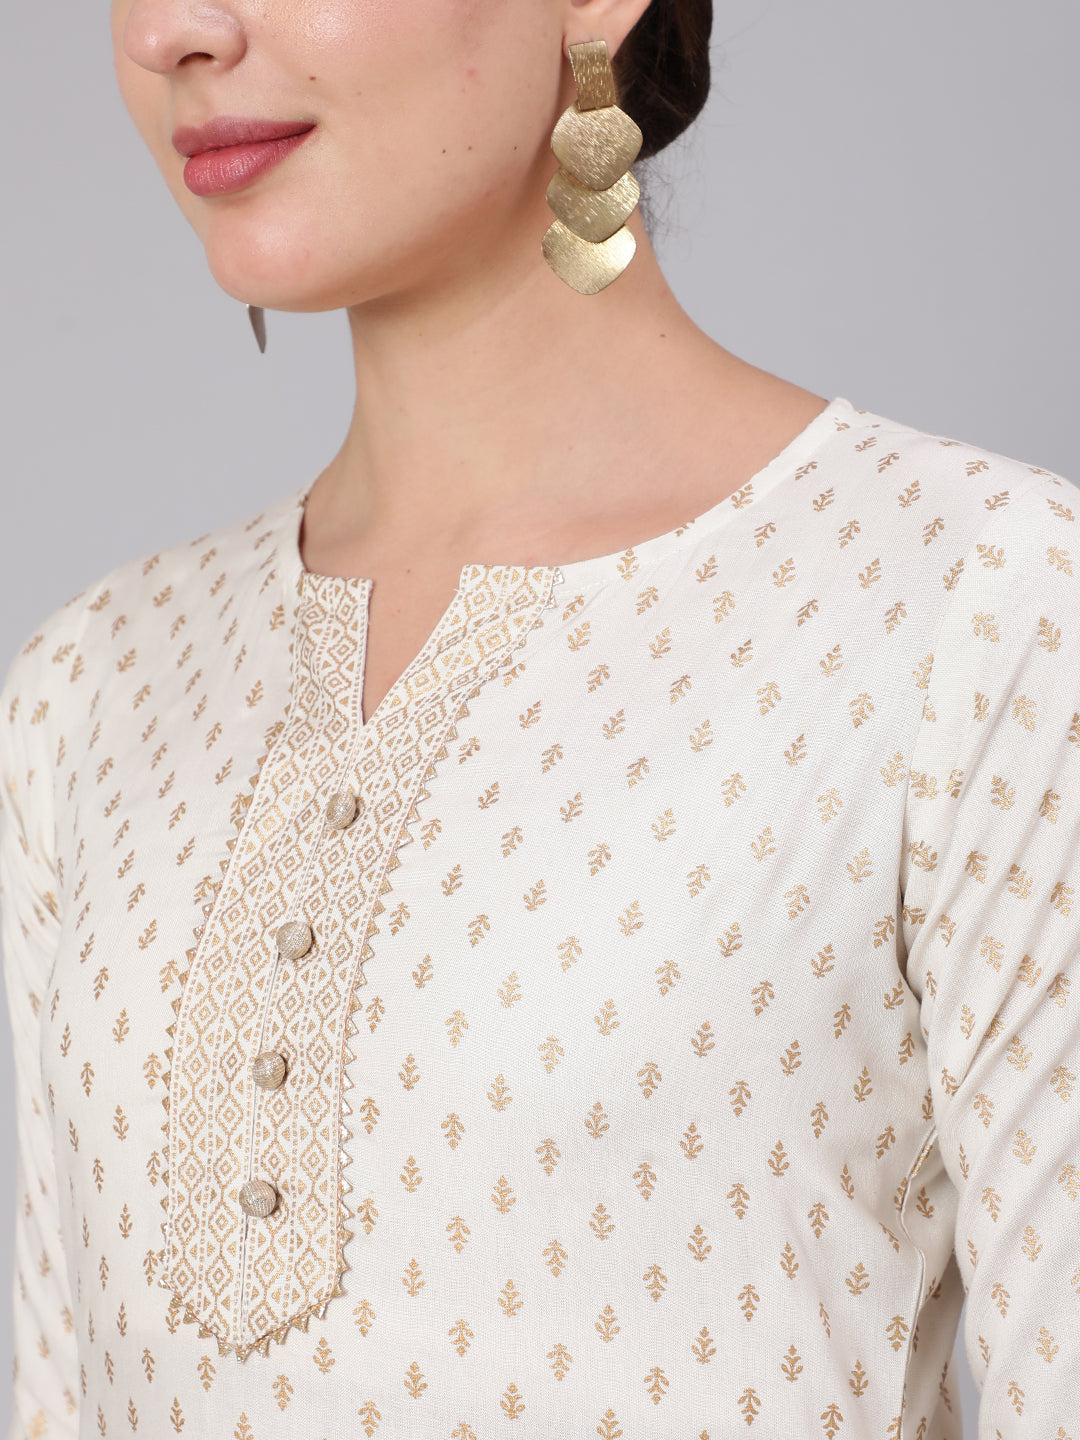 Women's White & Gold Printed Lace Details Kurta With Palazzo And Net Sequence Dupatta at PinkPhulkari 